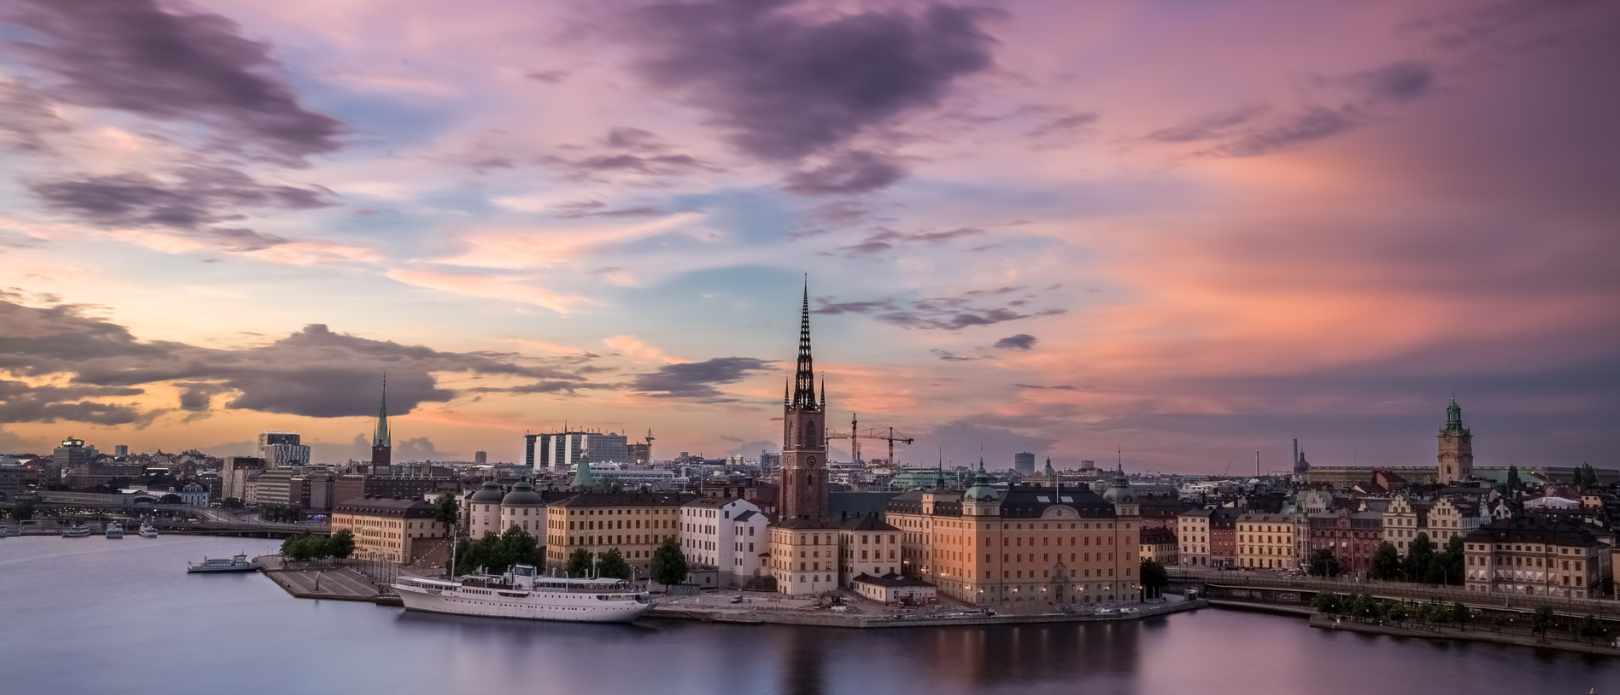 Birds eye evening view of downtown Stockholm